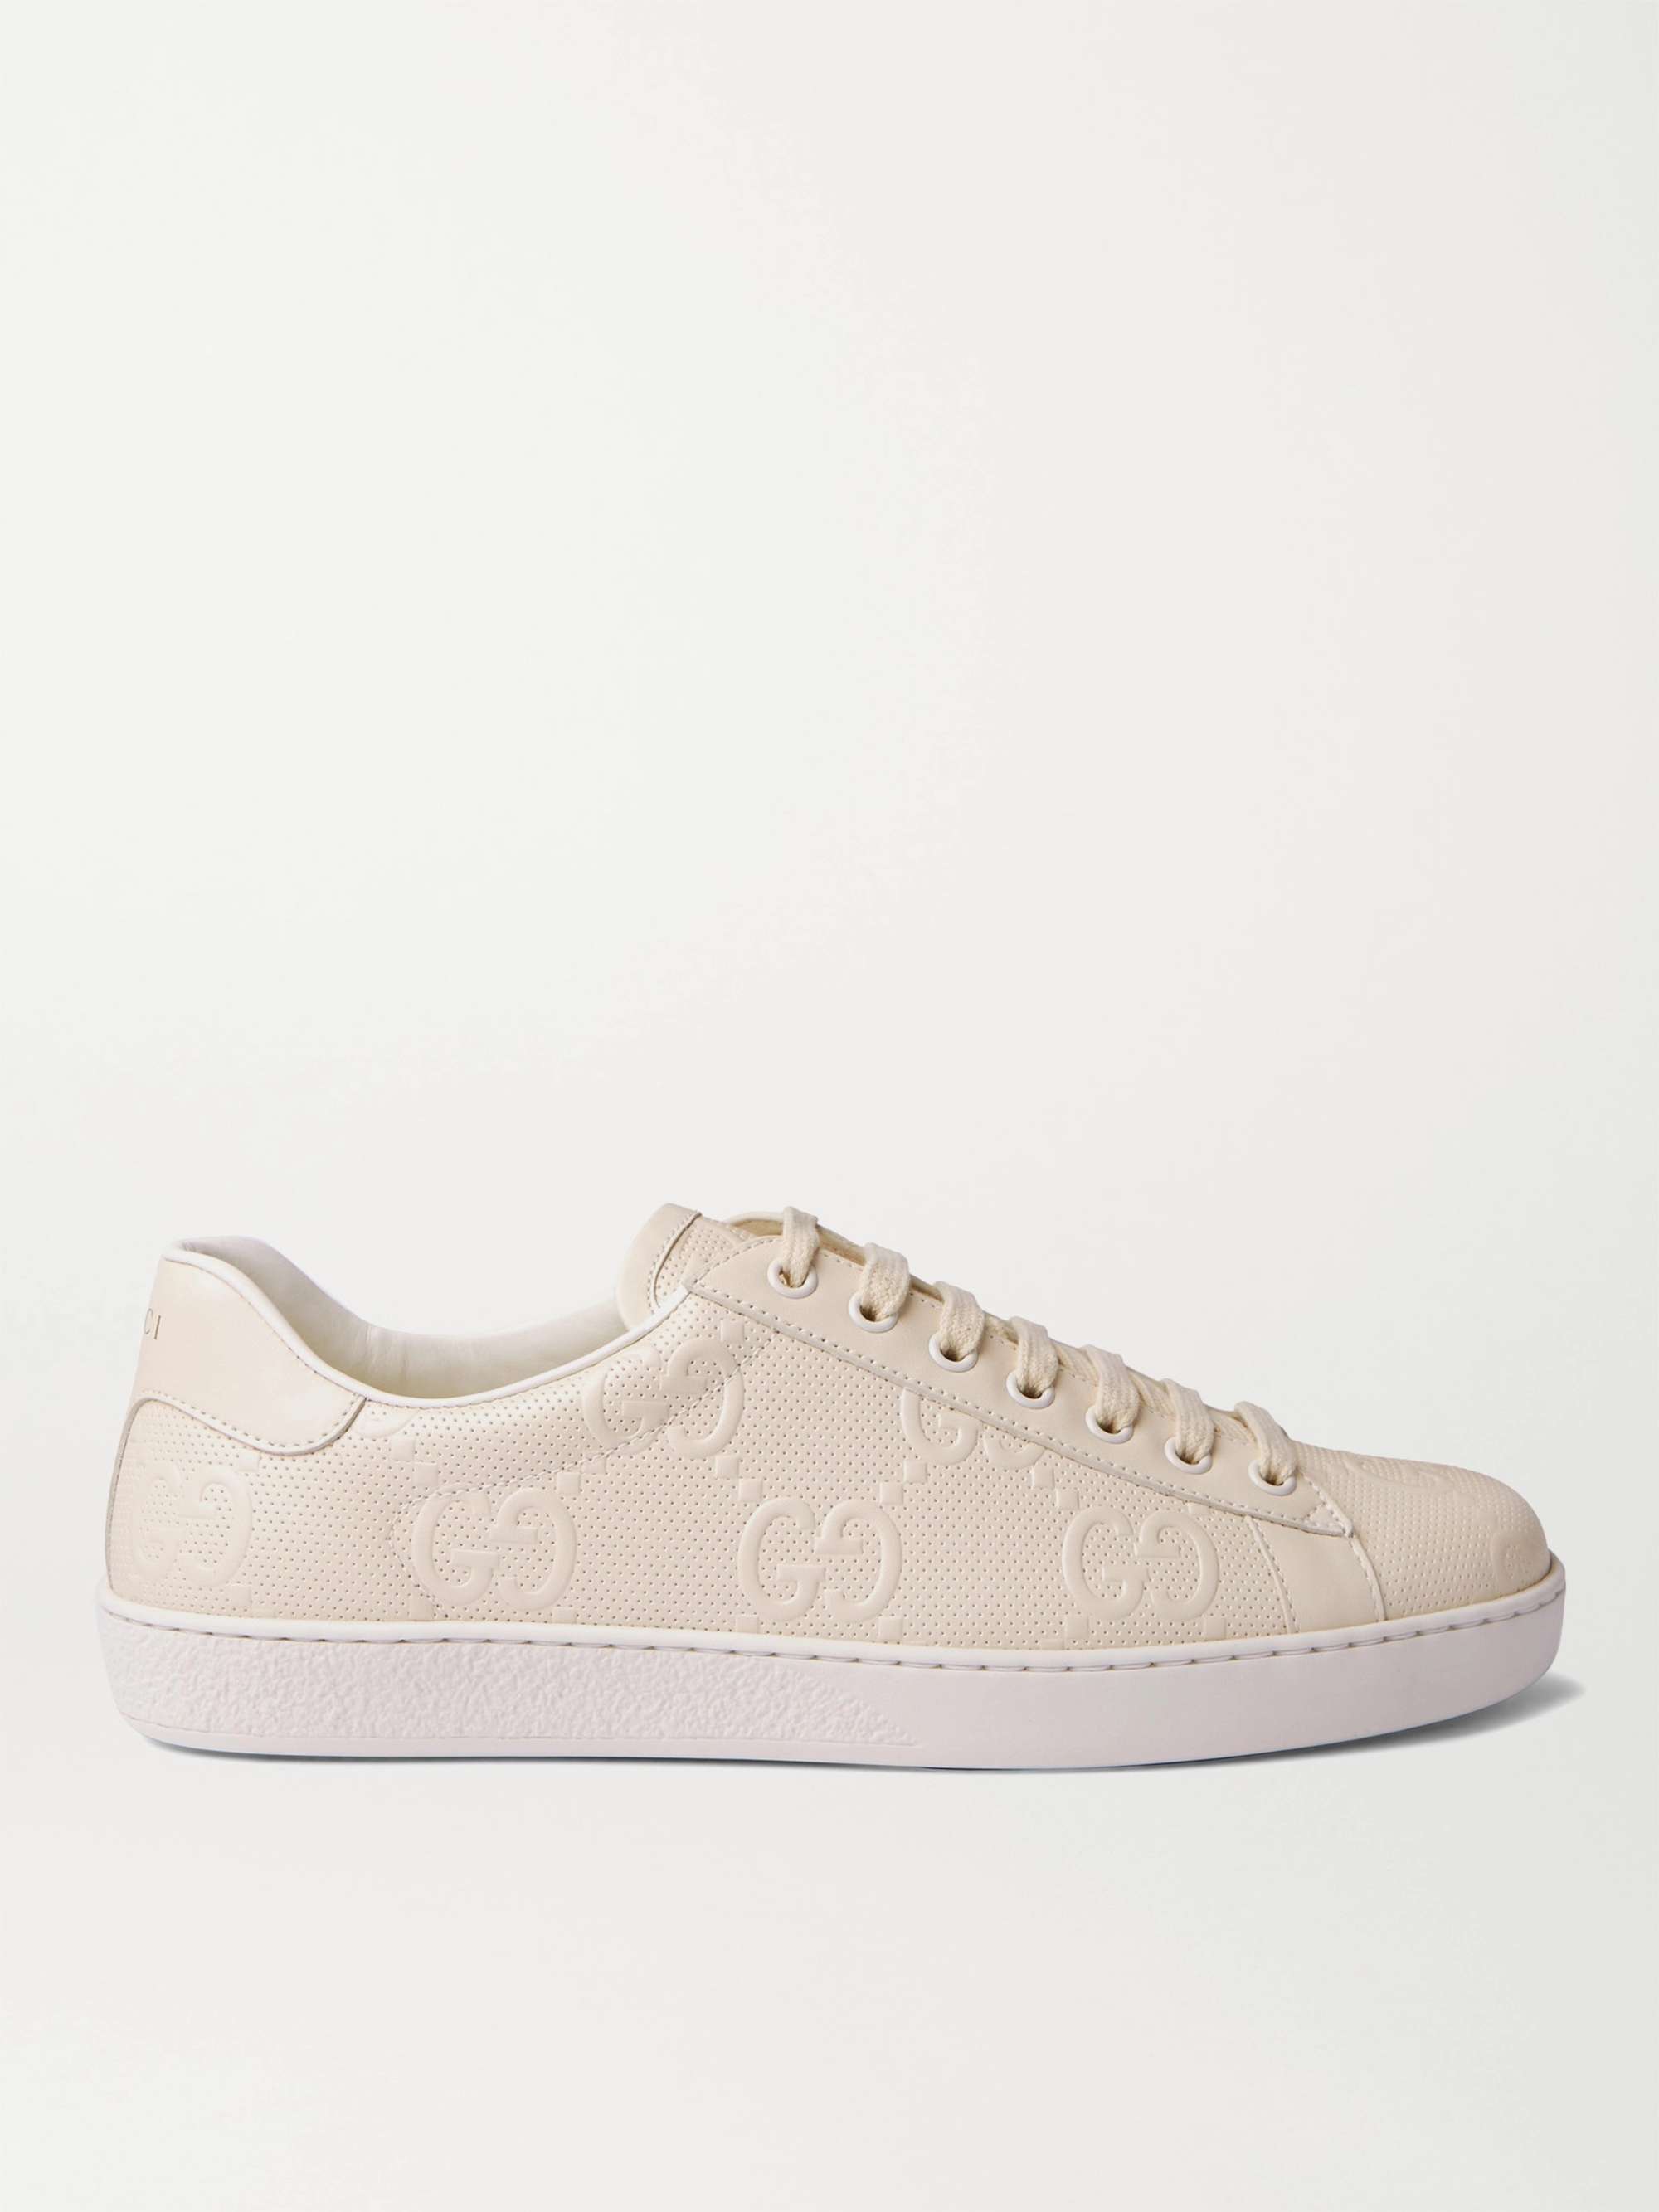 GUCCI Ace Logo-Embossed Perforated Leather Sneakers